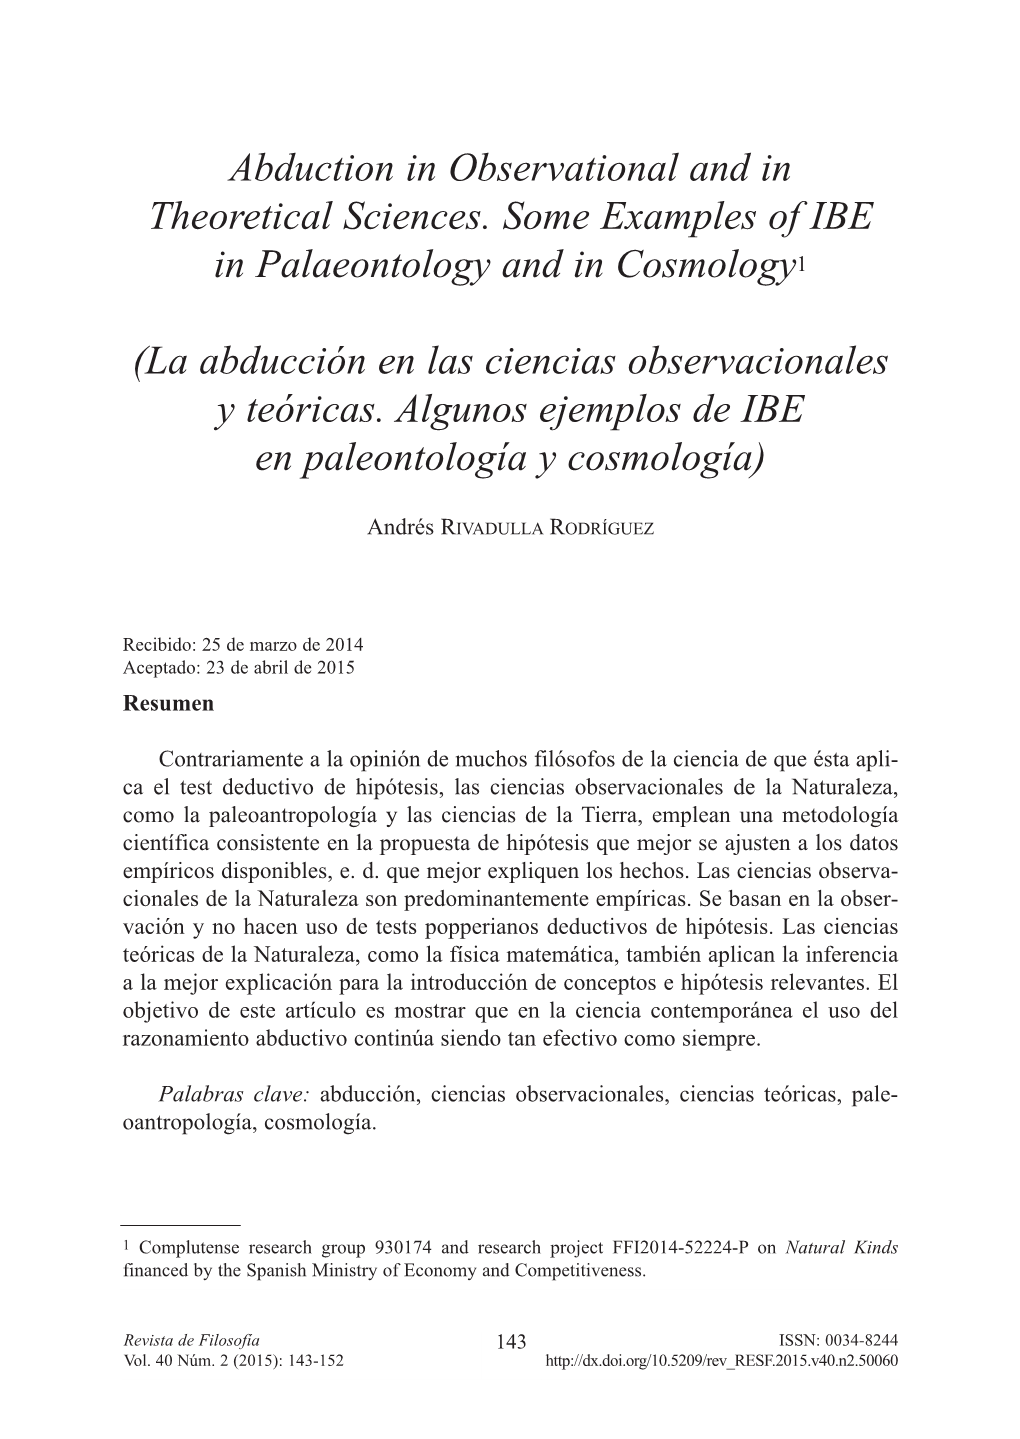 Abduction in Observational and in Theoretical Sciences. Some Examples of IBE in Palaeontology and in Cosmology 1